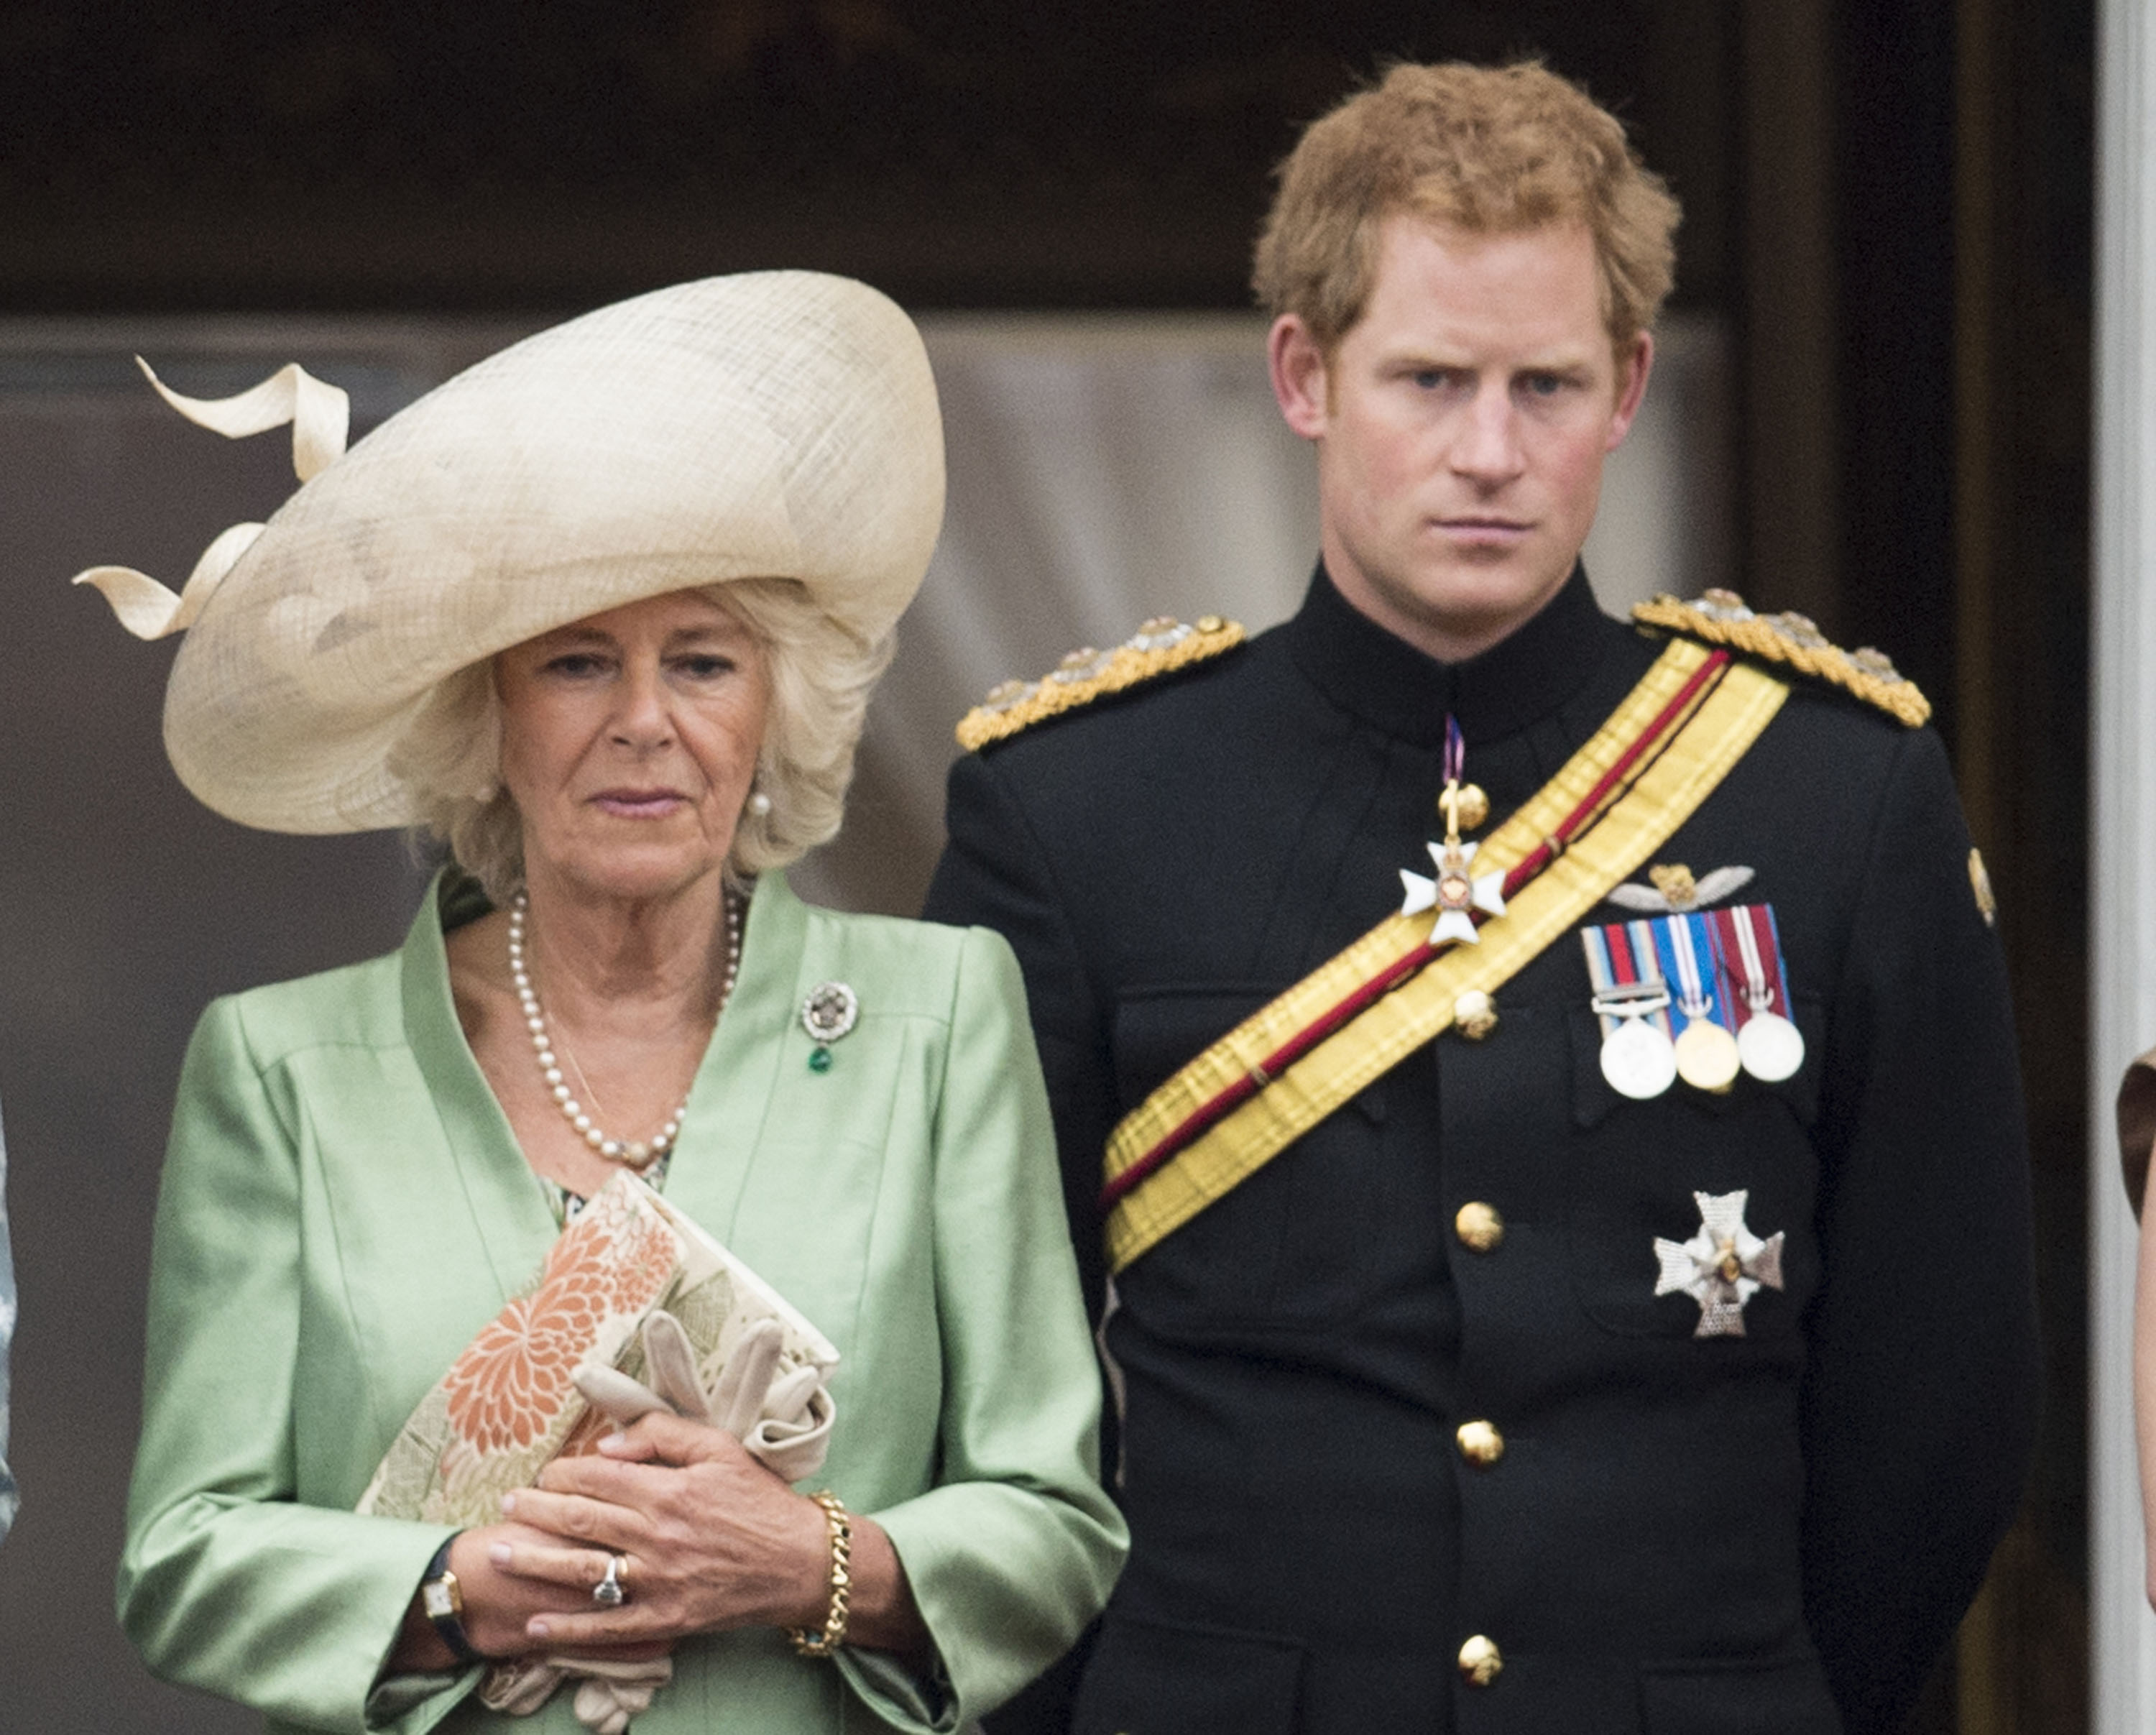 Camilla Parker-Bowles and Prince Harry pose next to each other during Trooping The Color party at Buckingham Palace in 2015.